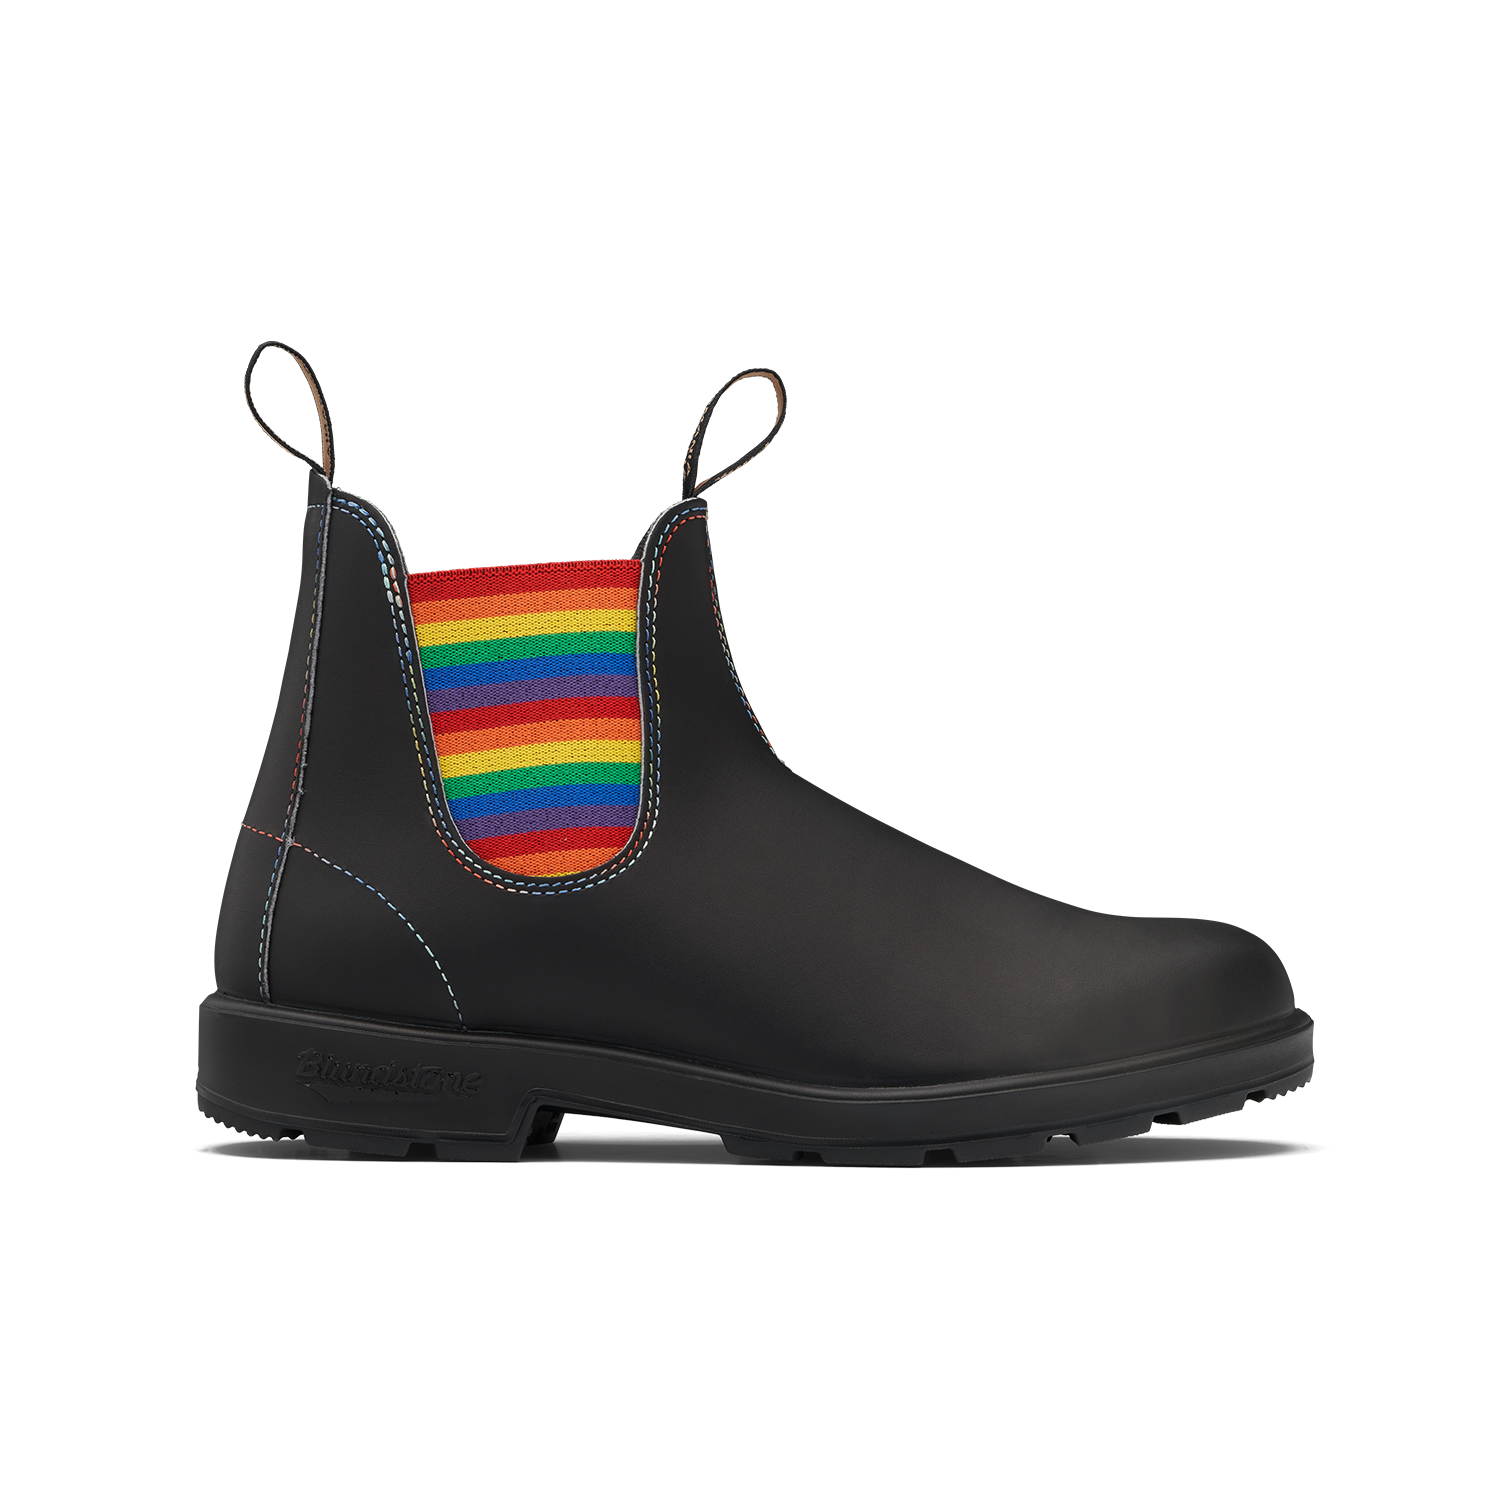 Blundstone 2105 Original Black with Rainbow Elastic and Contrast Stitching